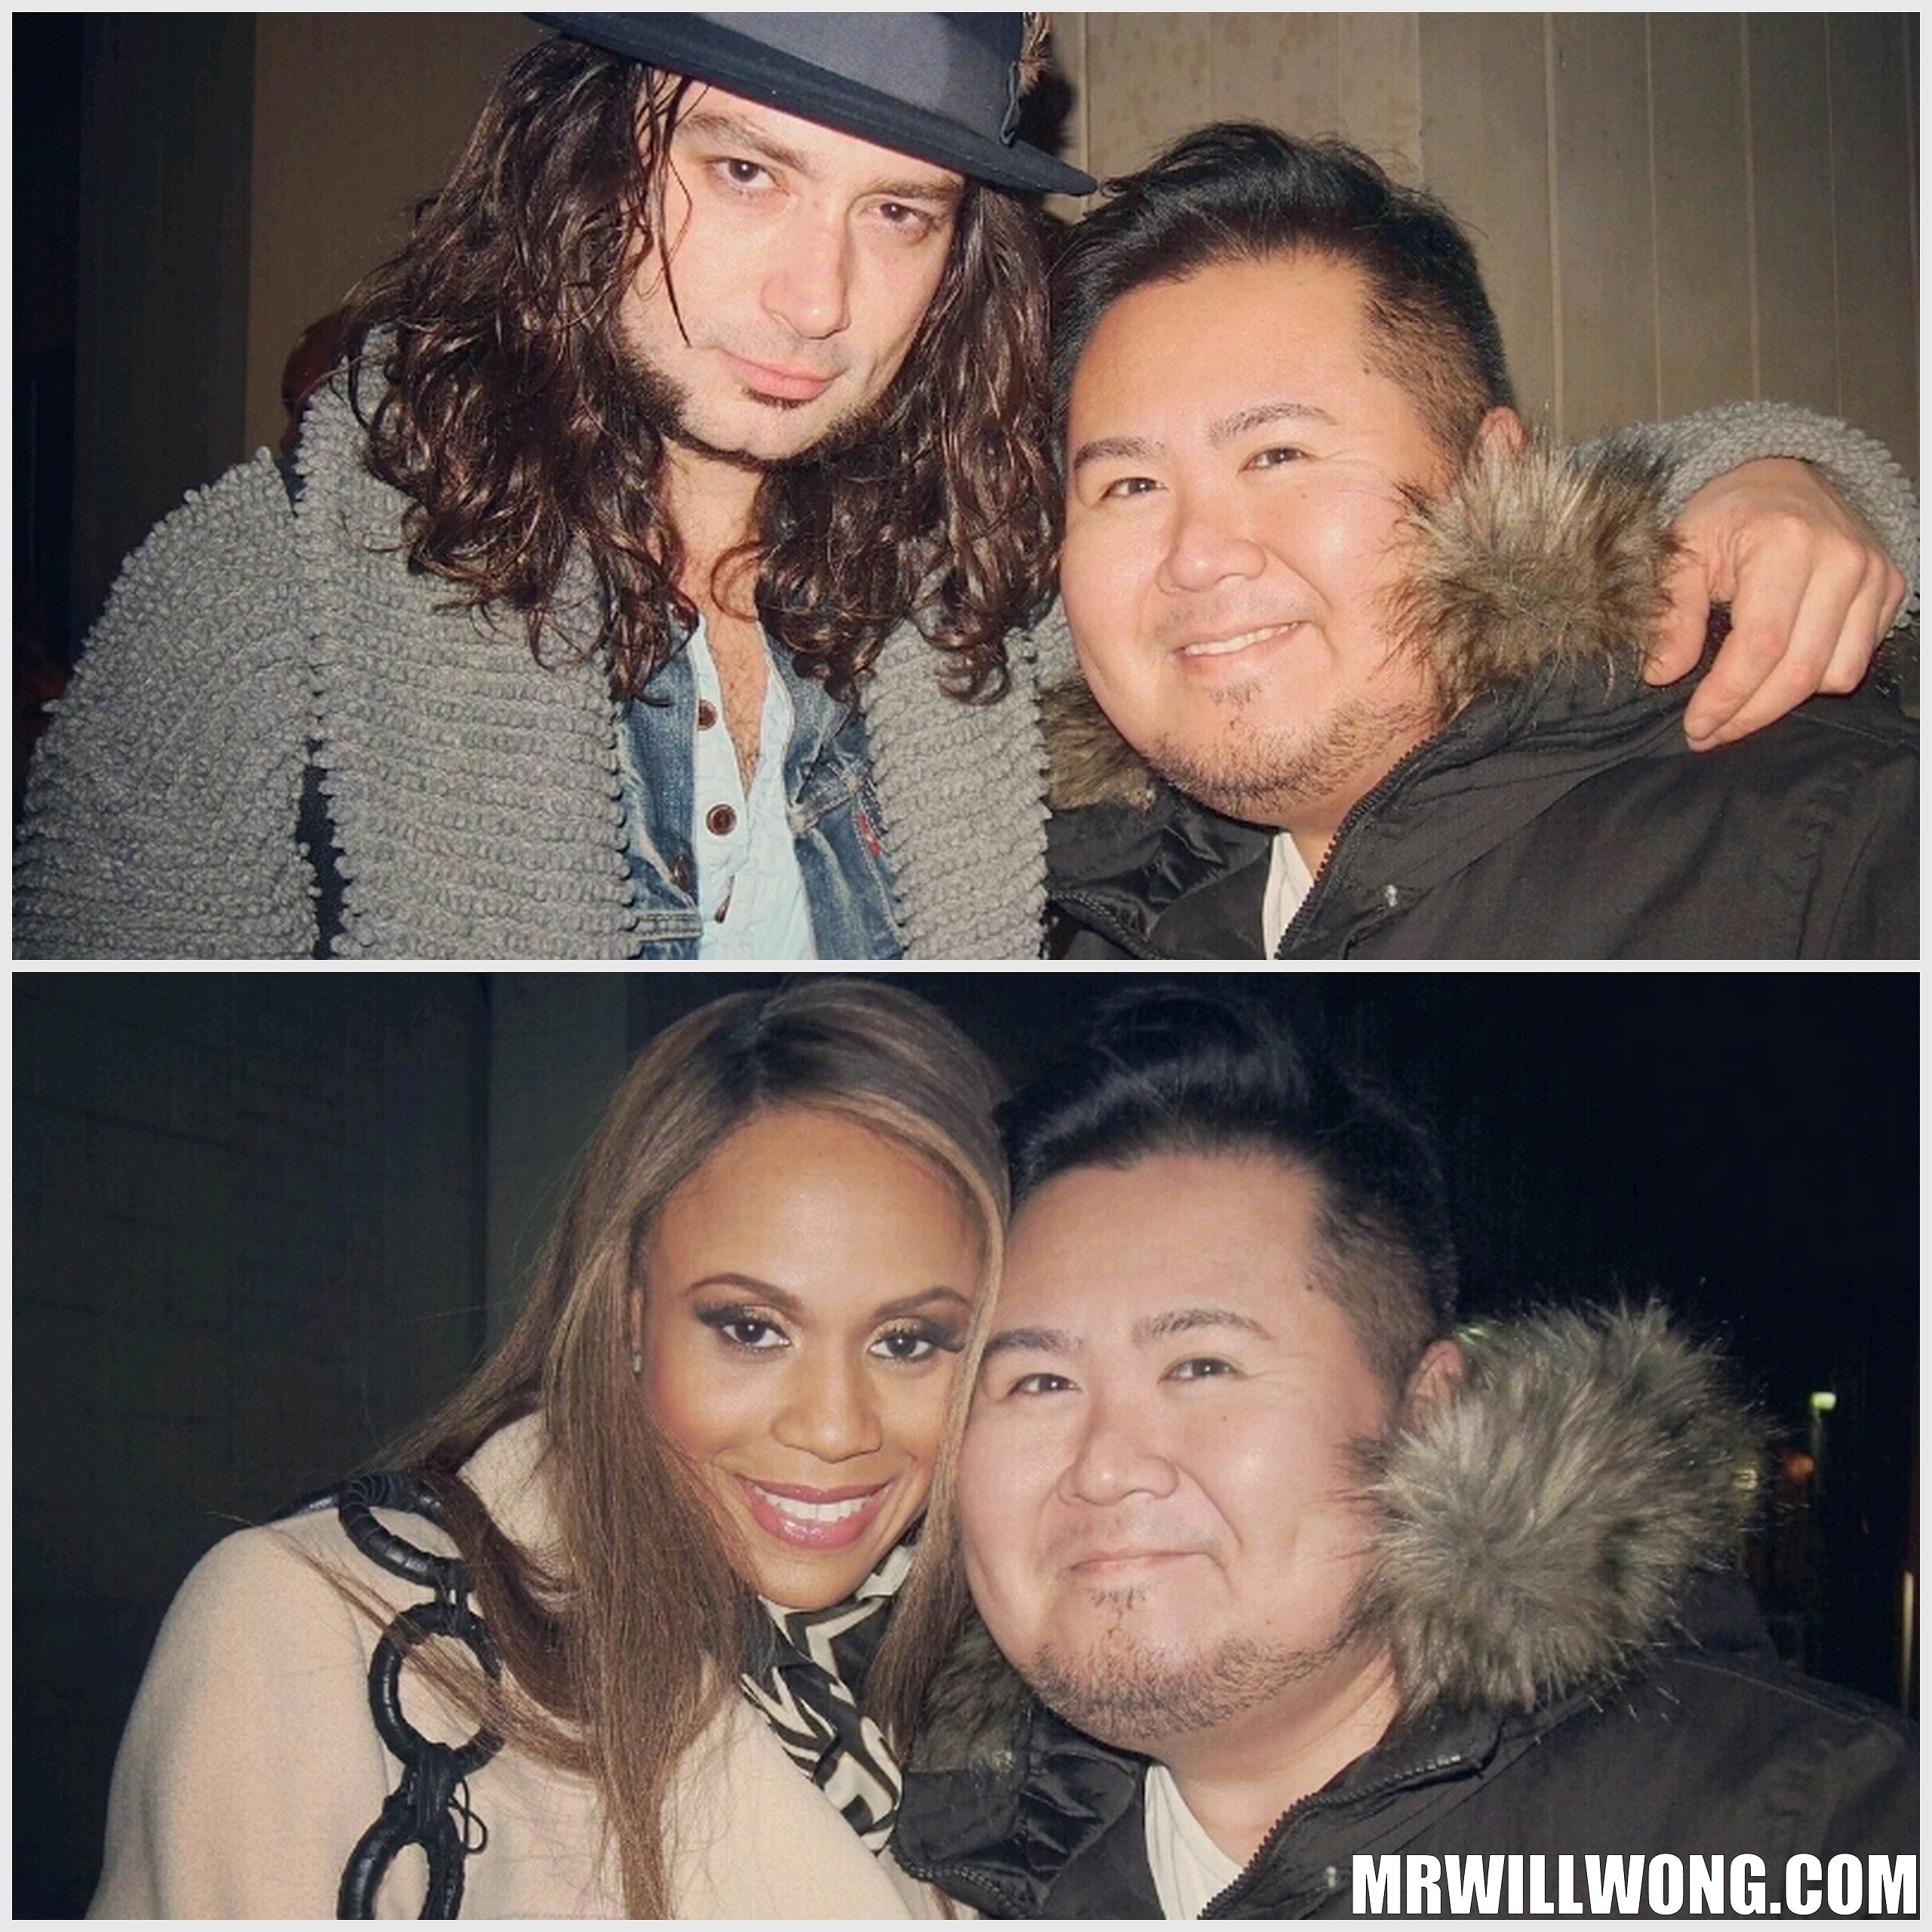 #SPOTTED: CONSTANTINE MAROULIS & DEBORAH COX IN TORONTO FOR “JEKYLL AND HYDE”